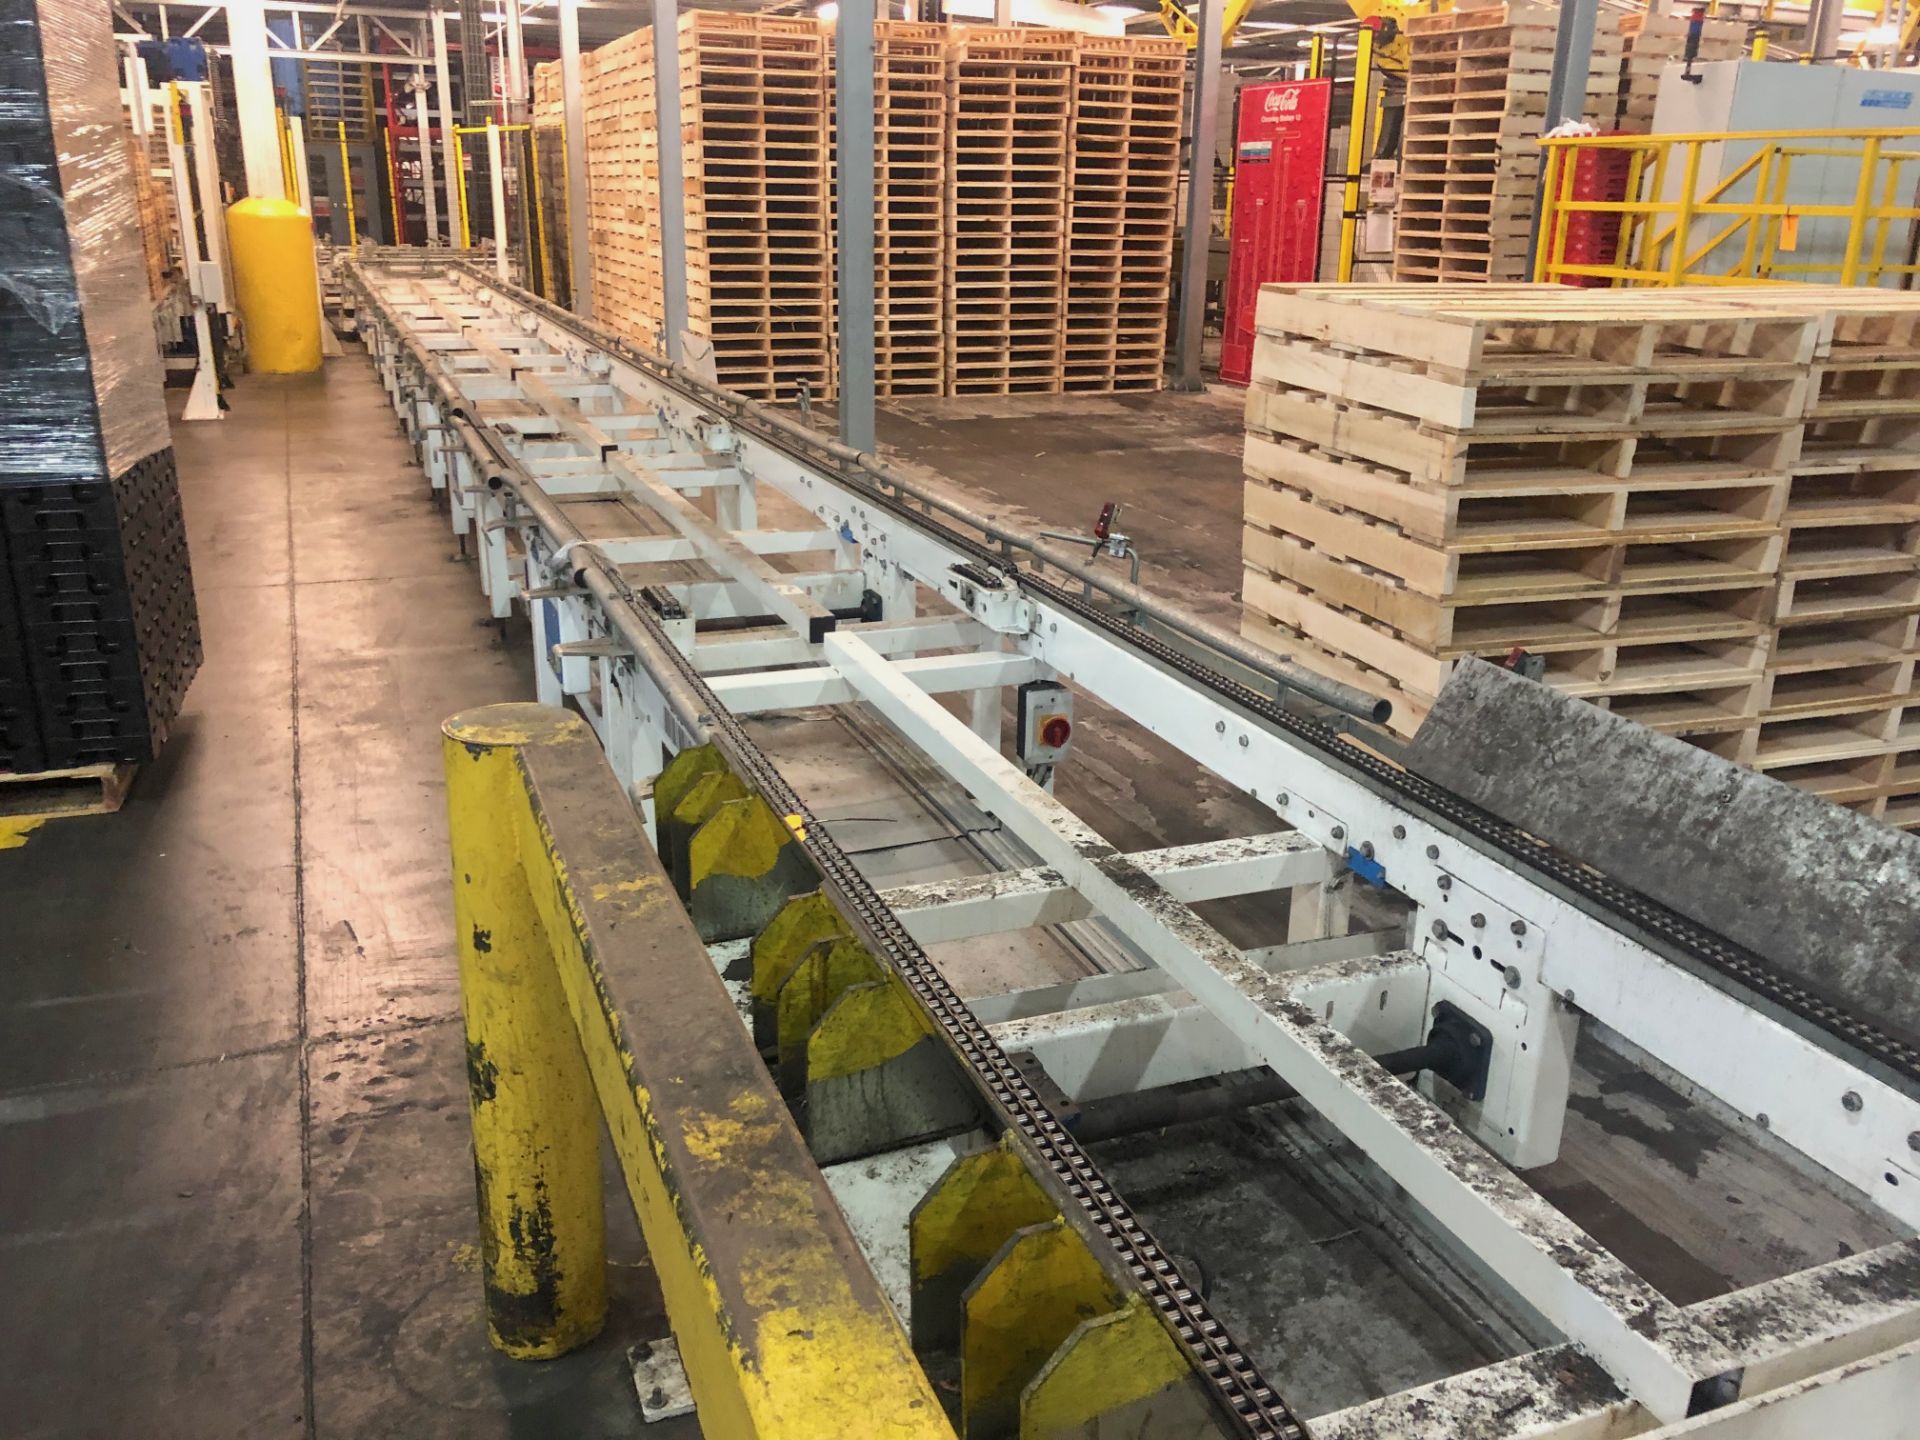 Pallet Dispenser Loading Area (to Feed Pallets to Robotic Palletizers)